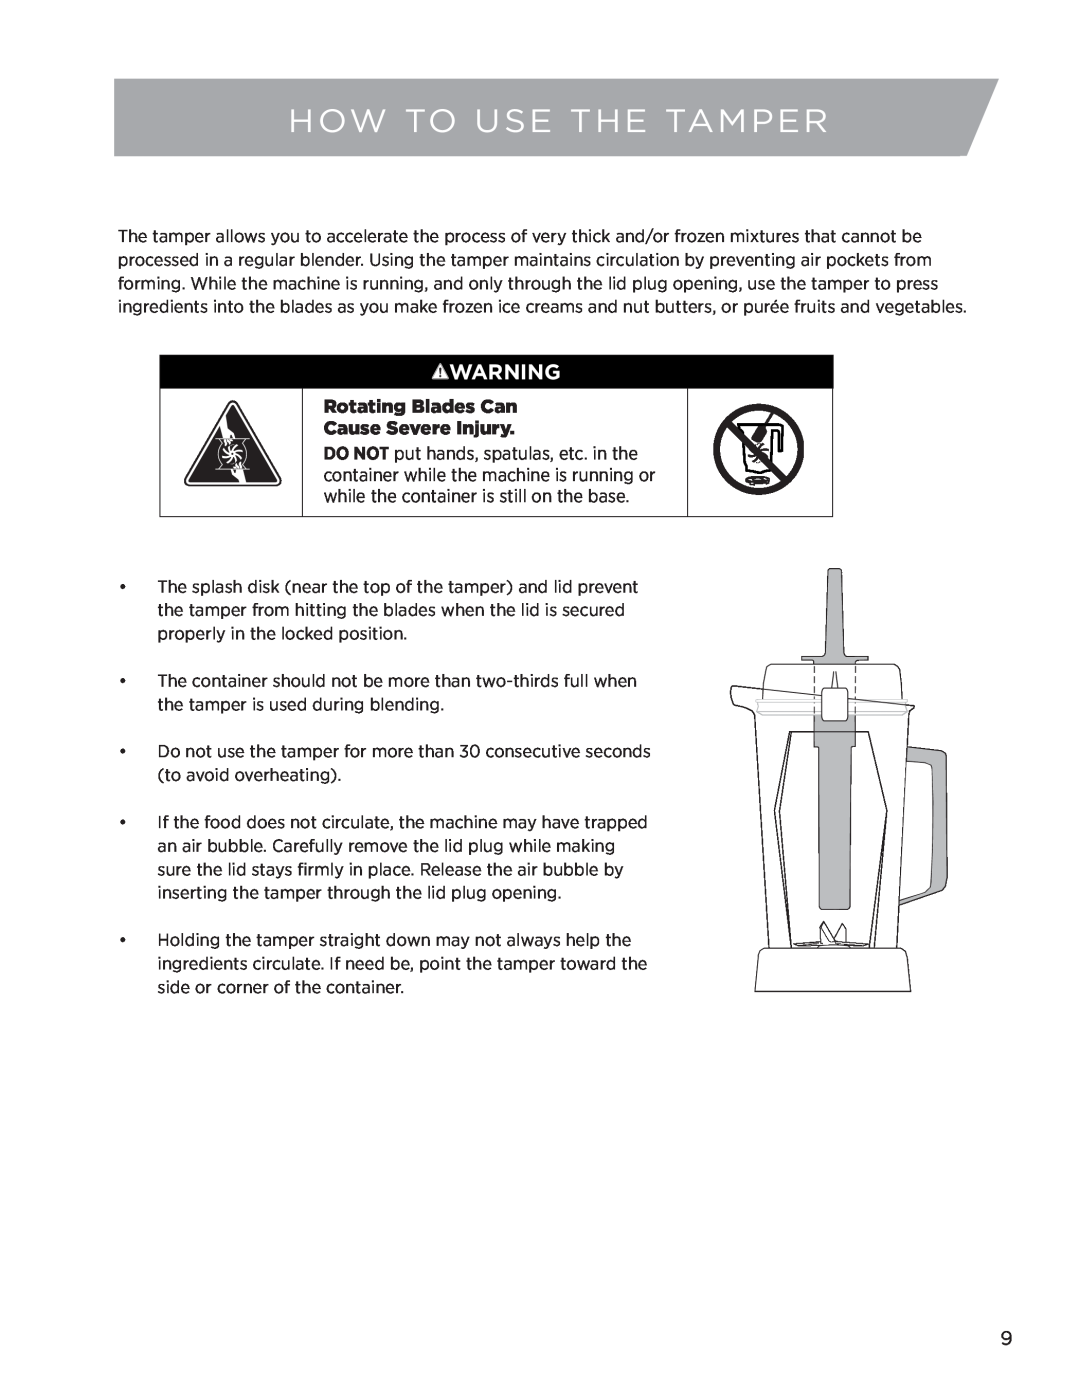 Vita-Mix 6300 owner manual How To Use The Tamper, Rotating Blades Can Cause Severe Injury 